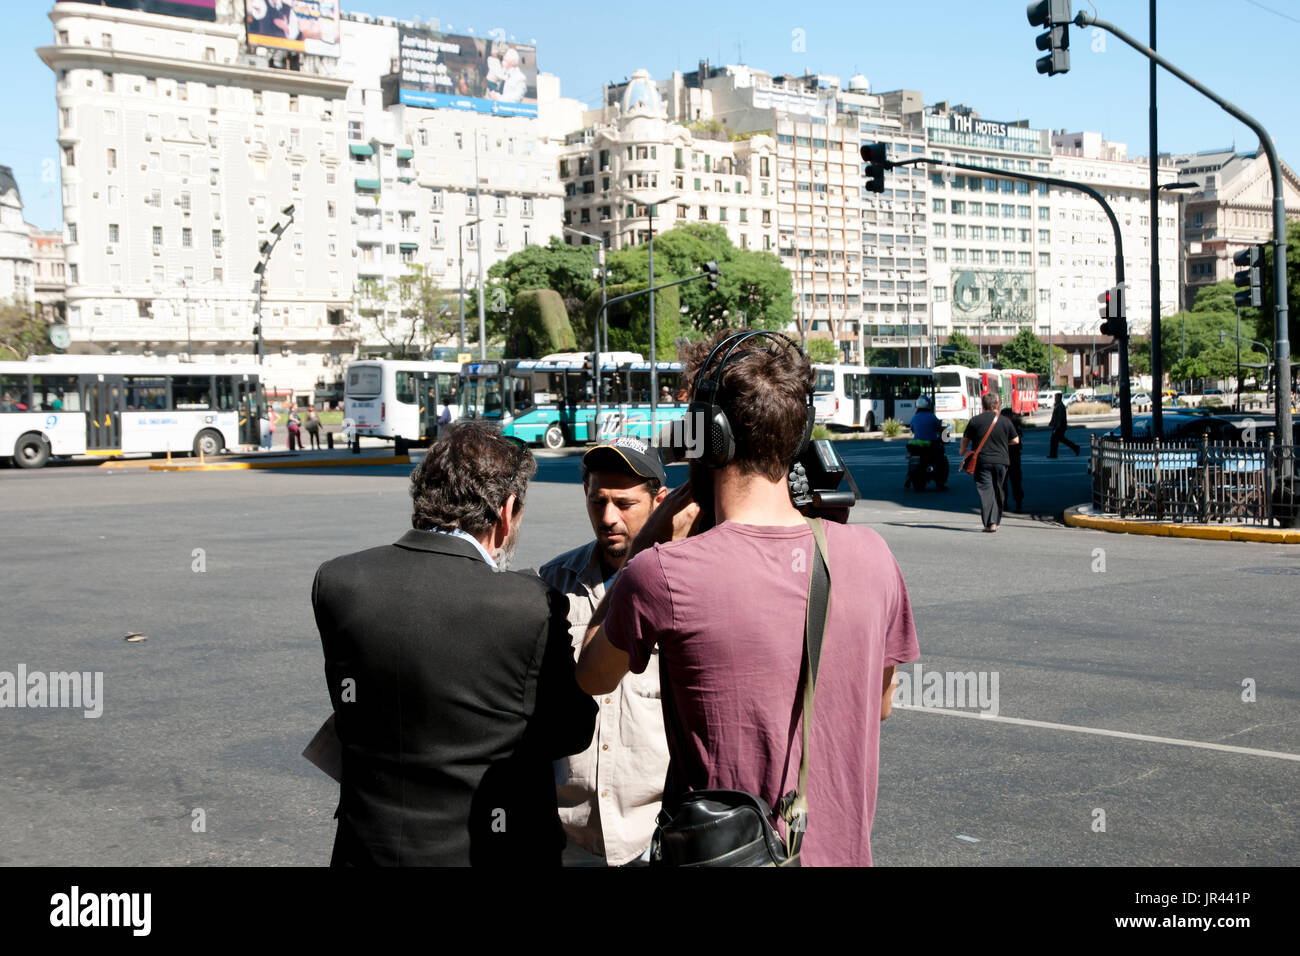 BUENOS AIRES, ARGENTINA - December 15, 2016: TV News crew interviewing a local man during a protest on public services Stock Photo